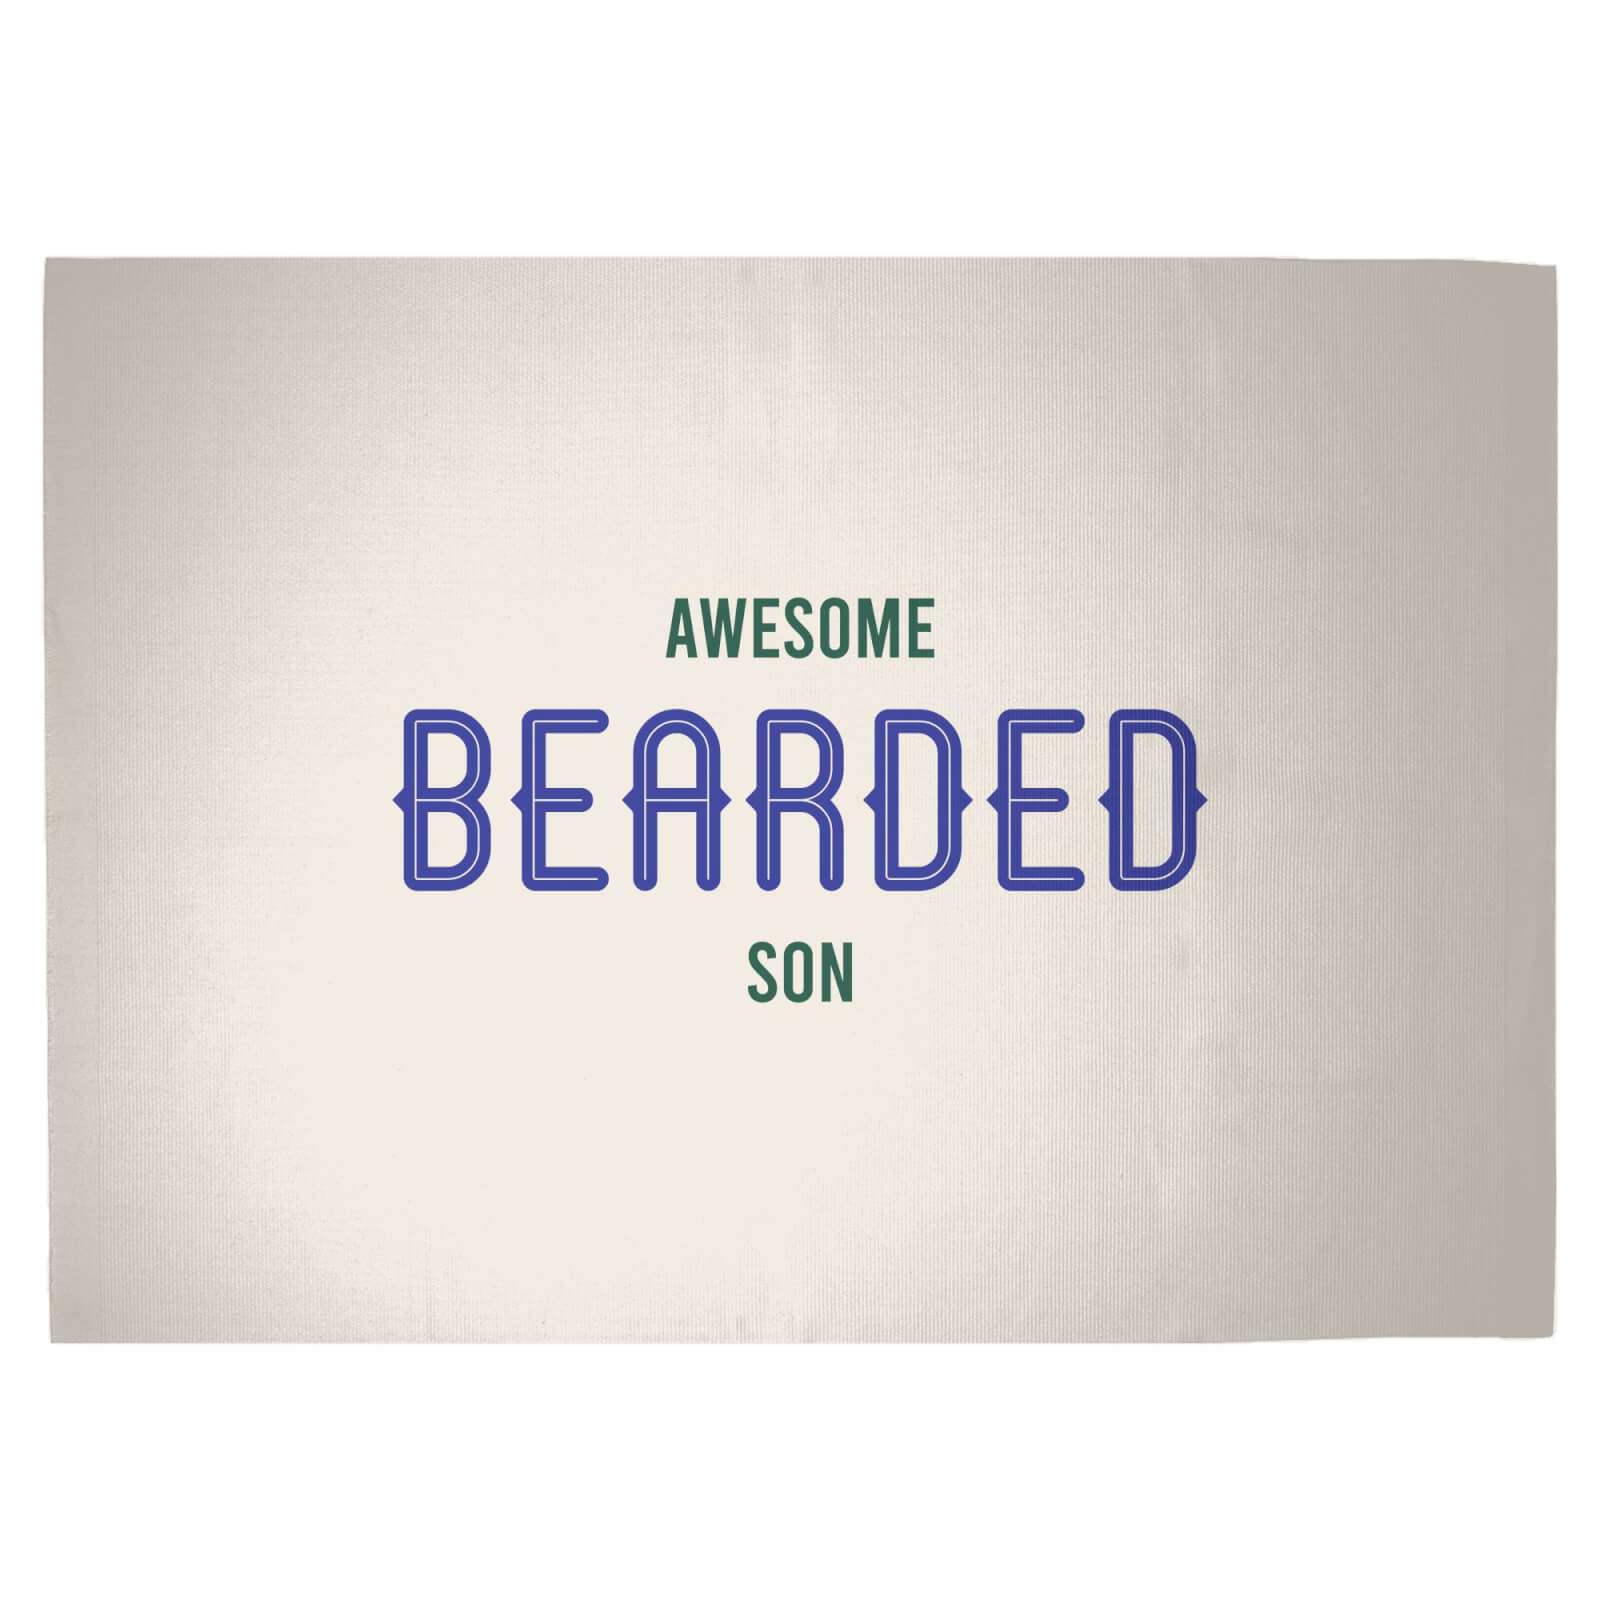 Awesome Bearded Son Woven Rug - Large